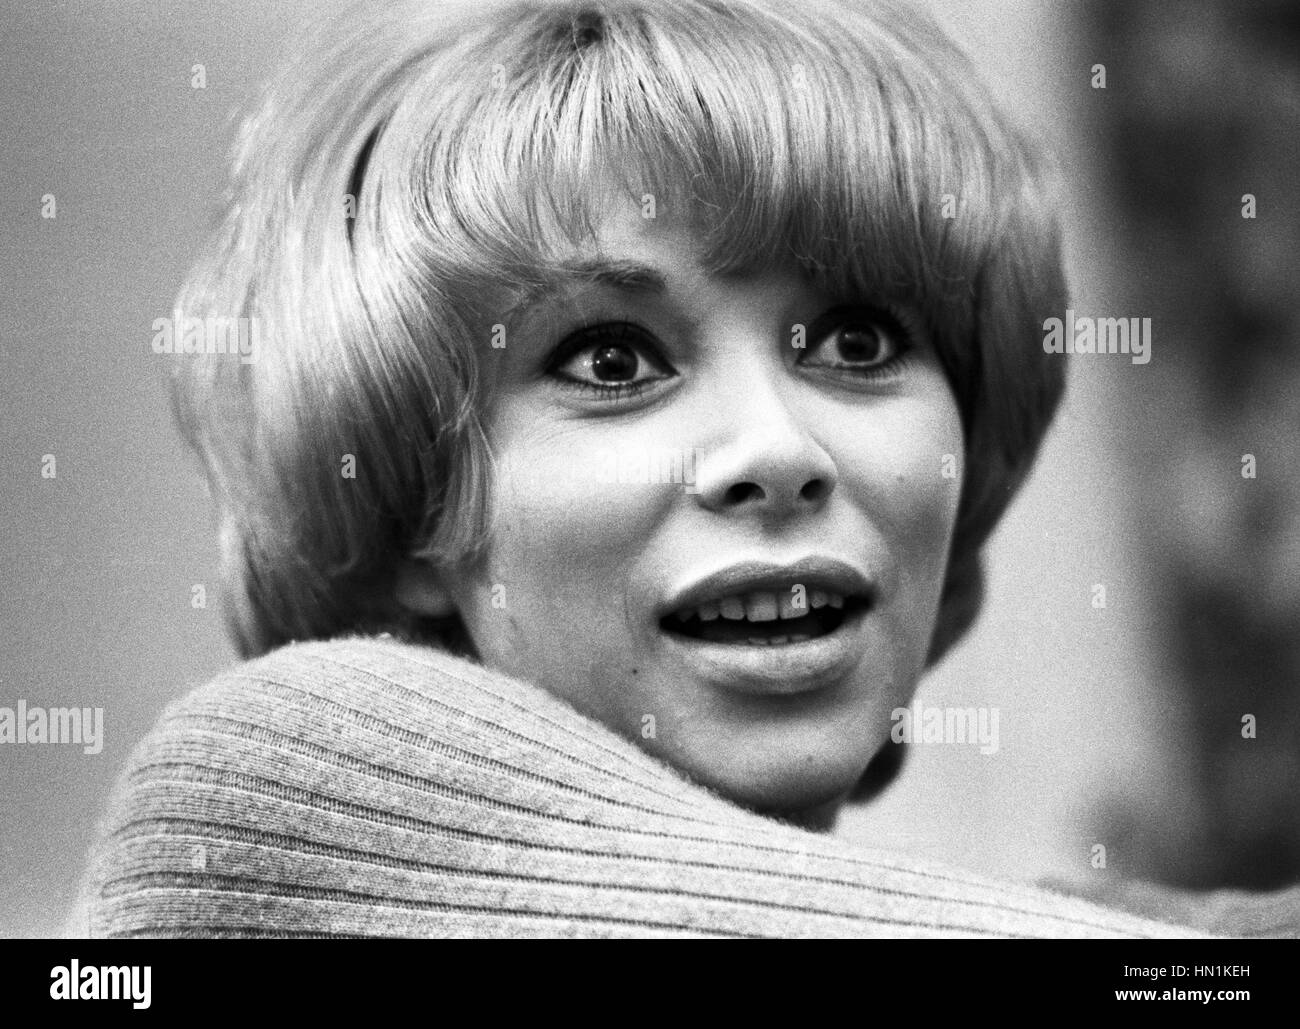 French actress Mireille Darc, photographed in 1969. Stock Photo